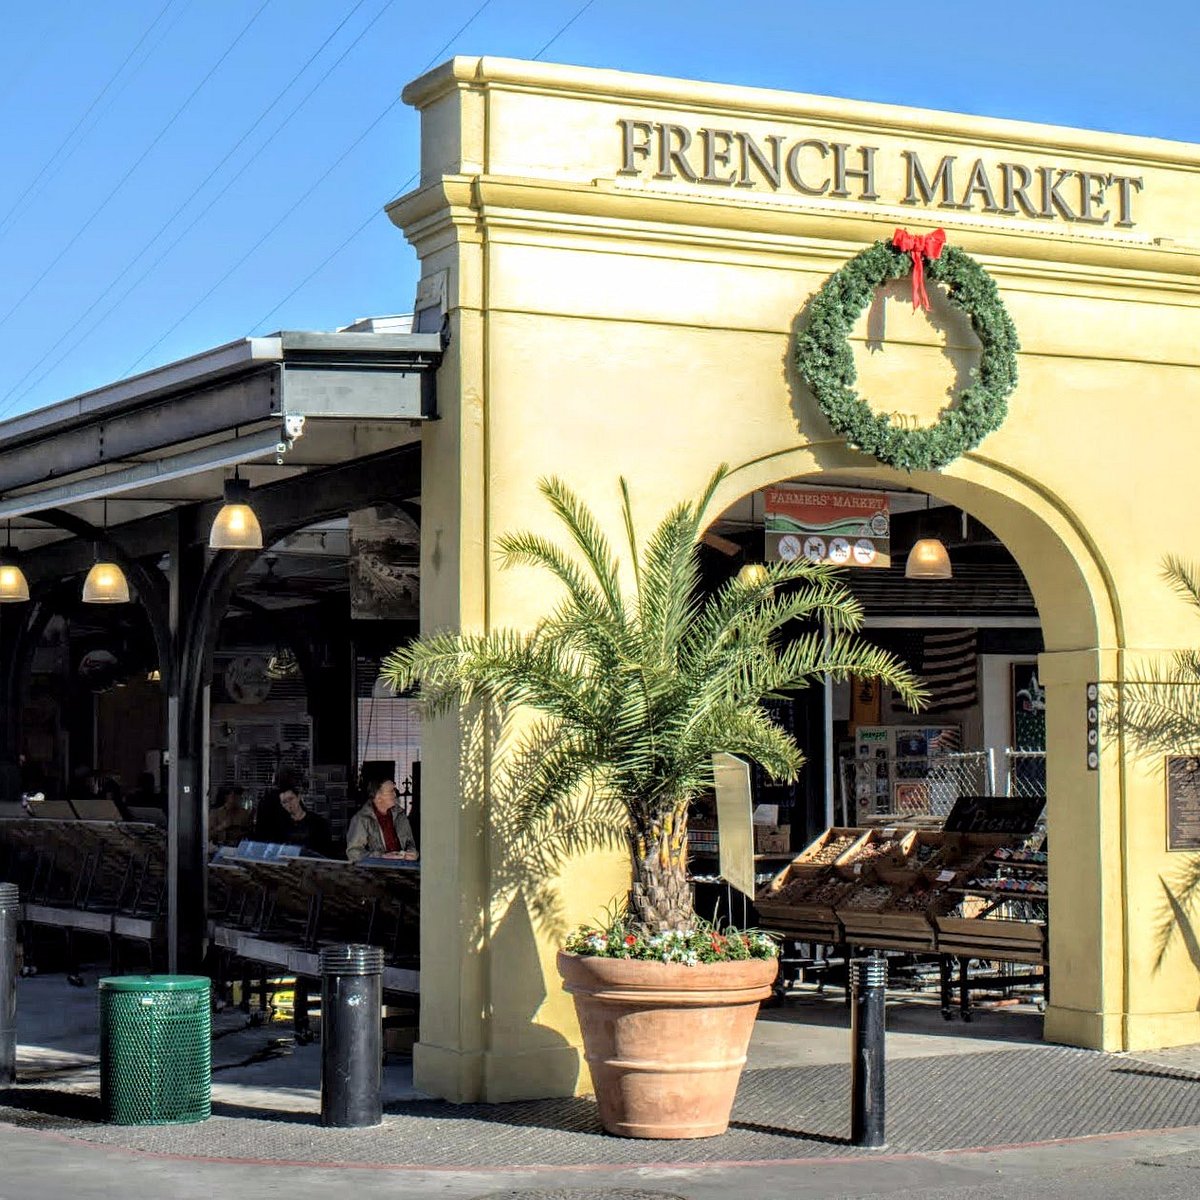 Late Night Eats in the French Quarter - French Market Inn